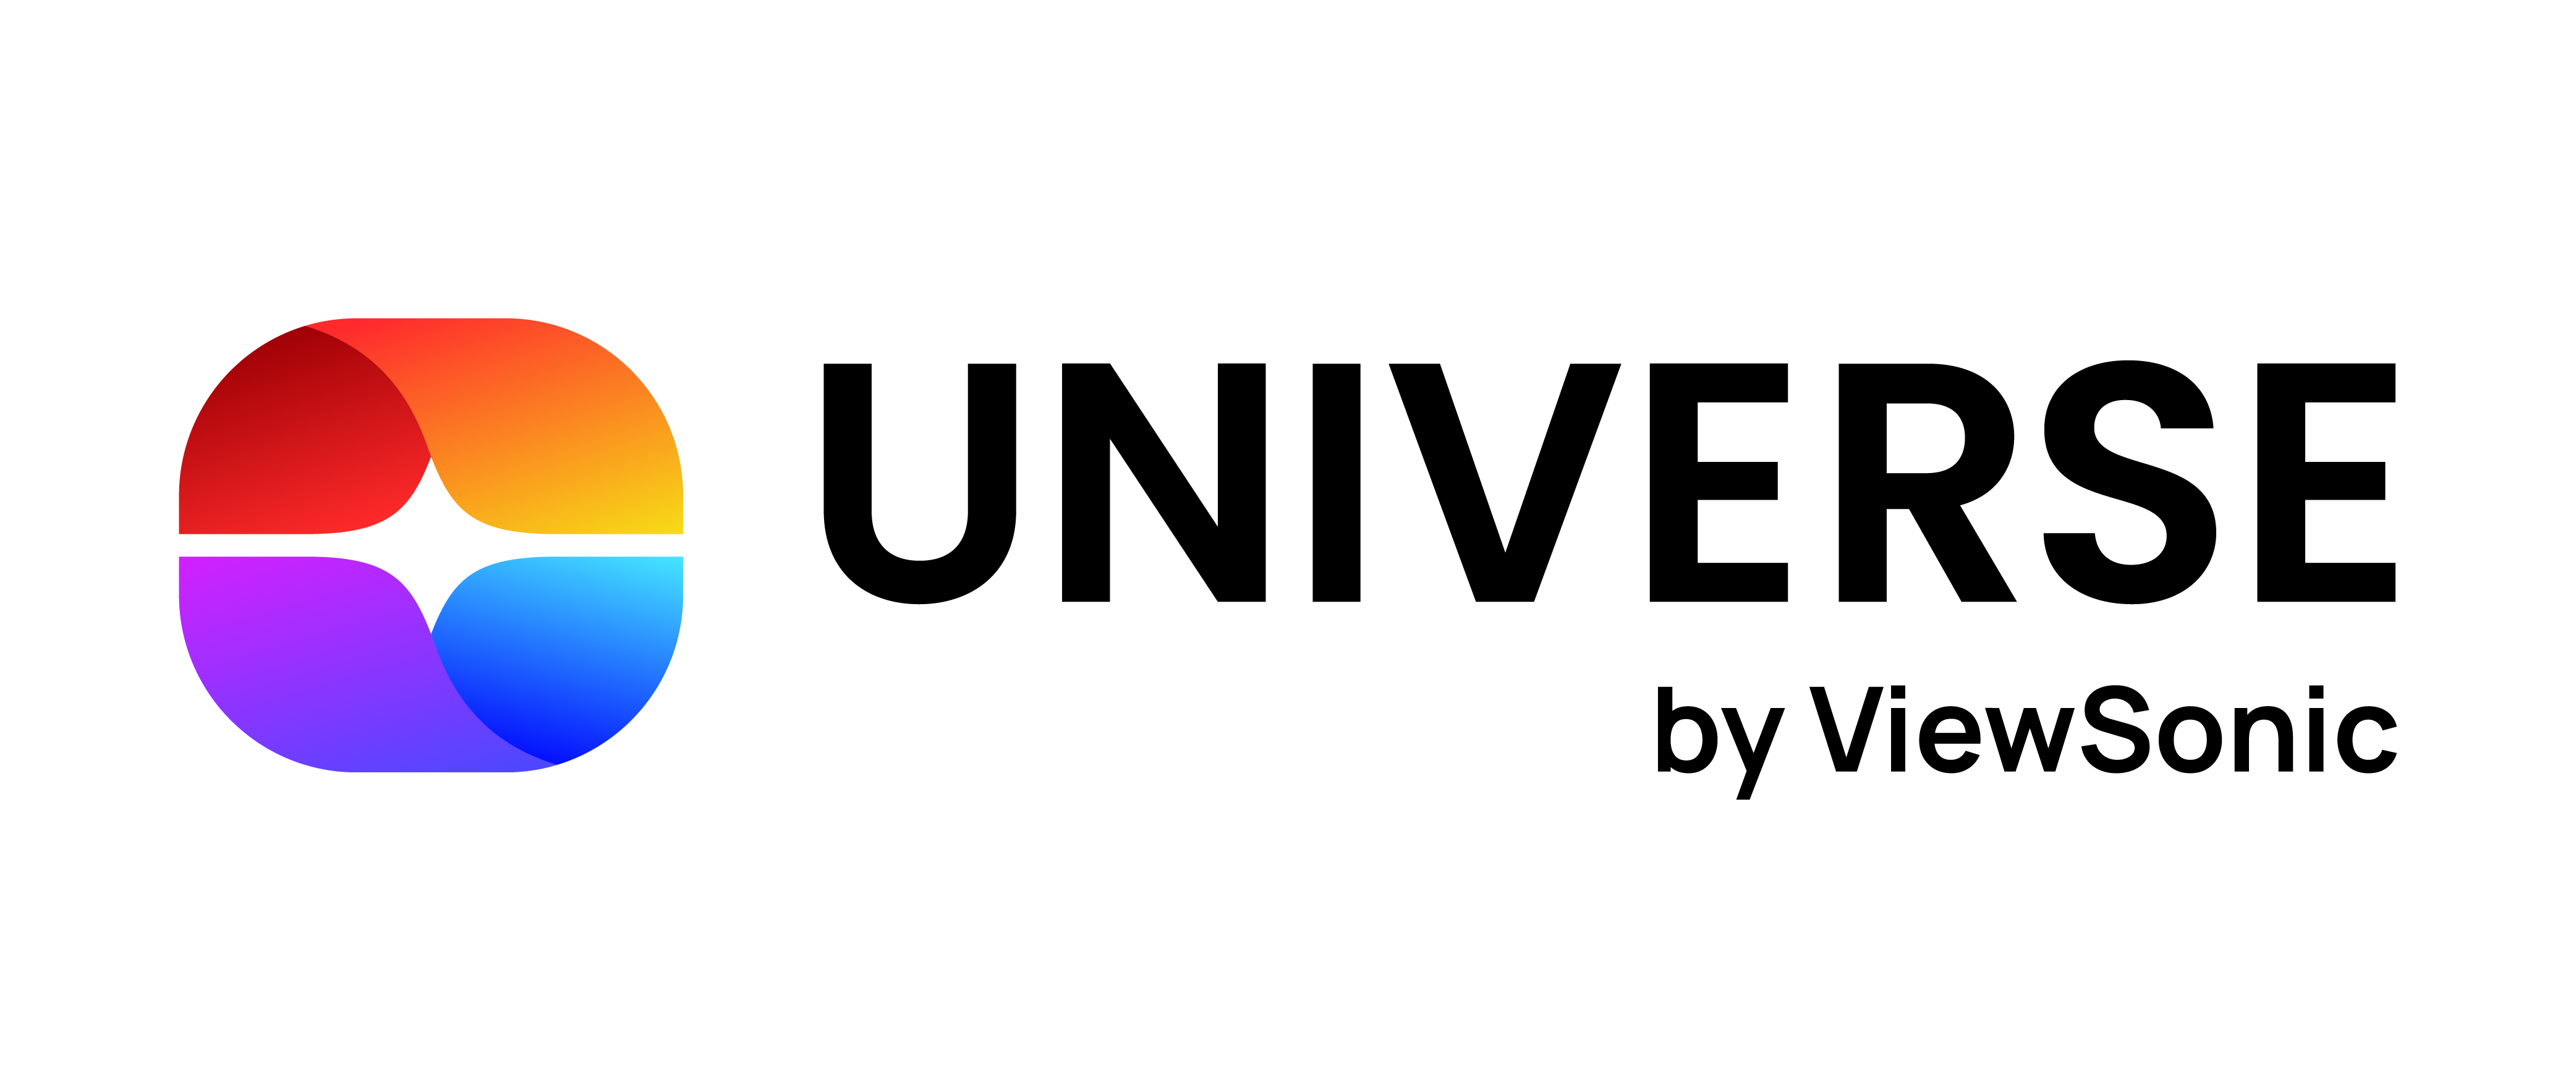 Universe by ViewSonic written in black with red, orange, purple, blue logo to the left